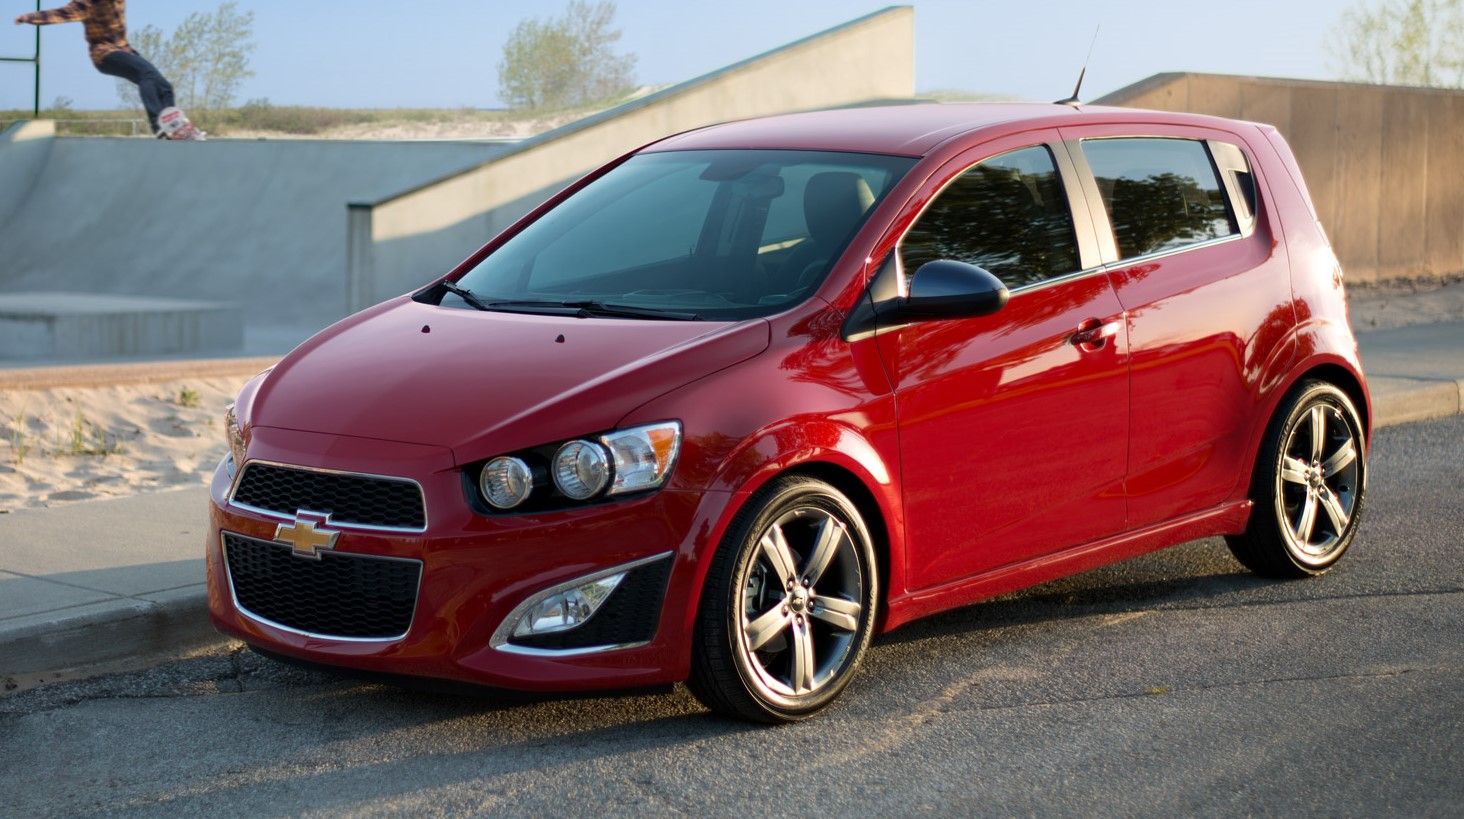 2014 Chevrolet Sonic Preview, Car News